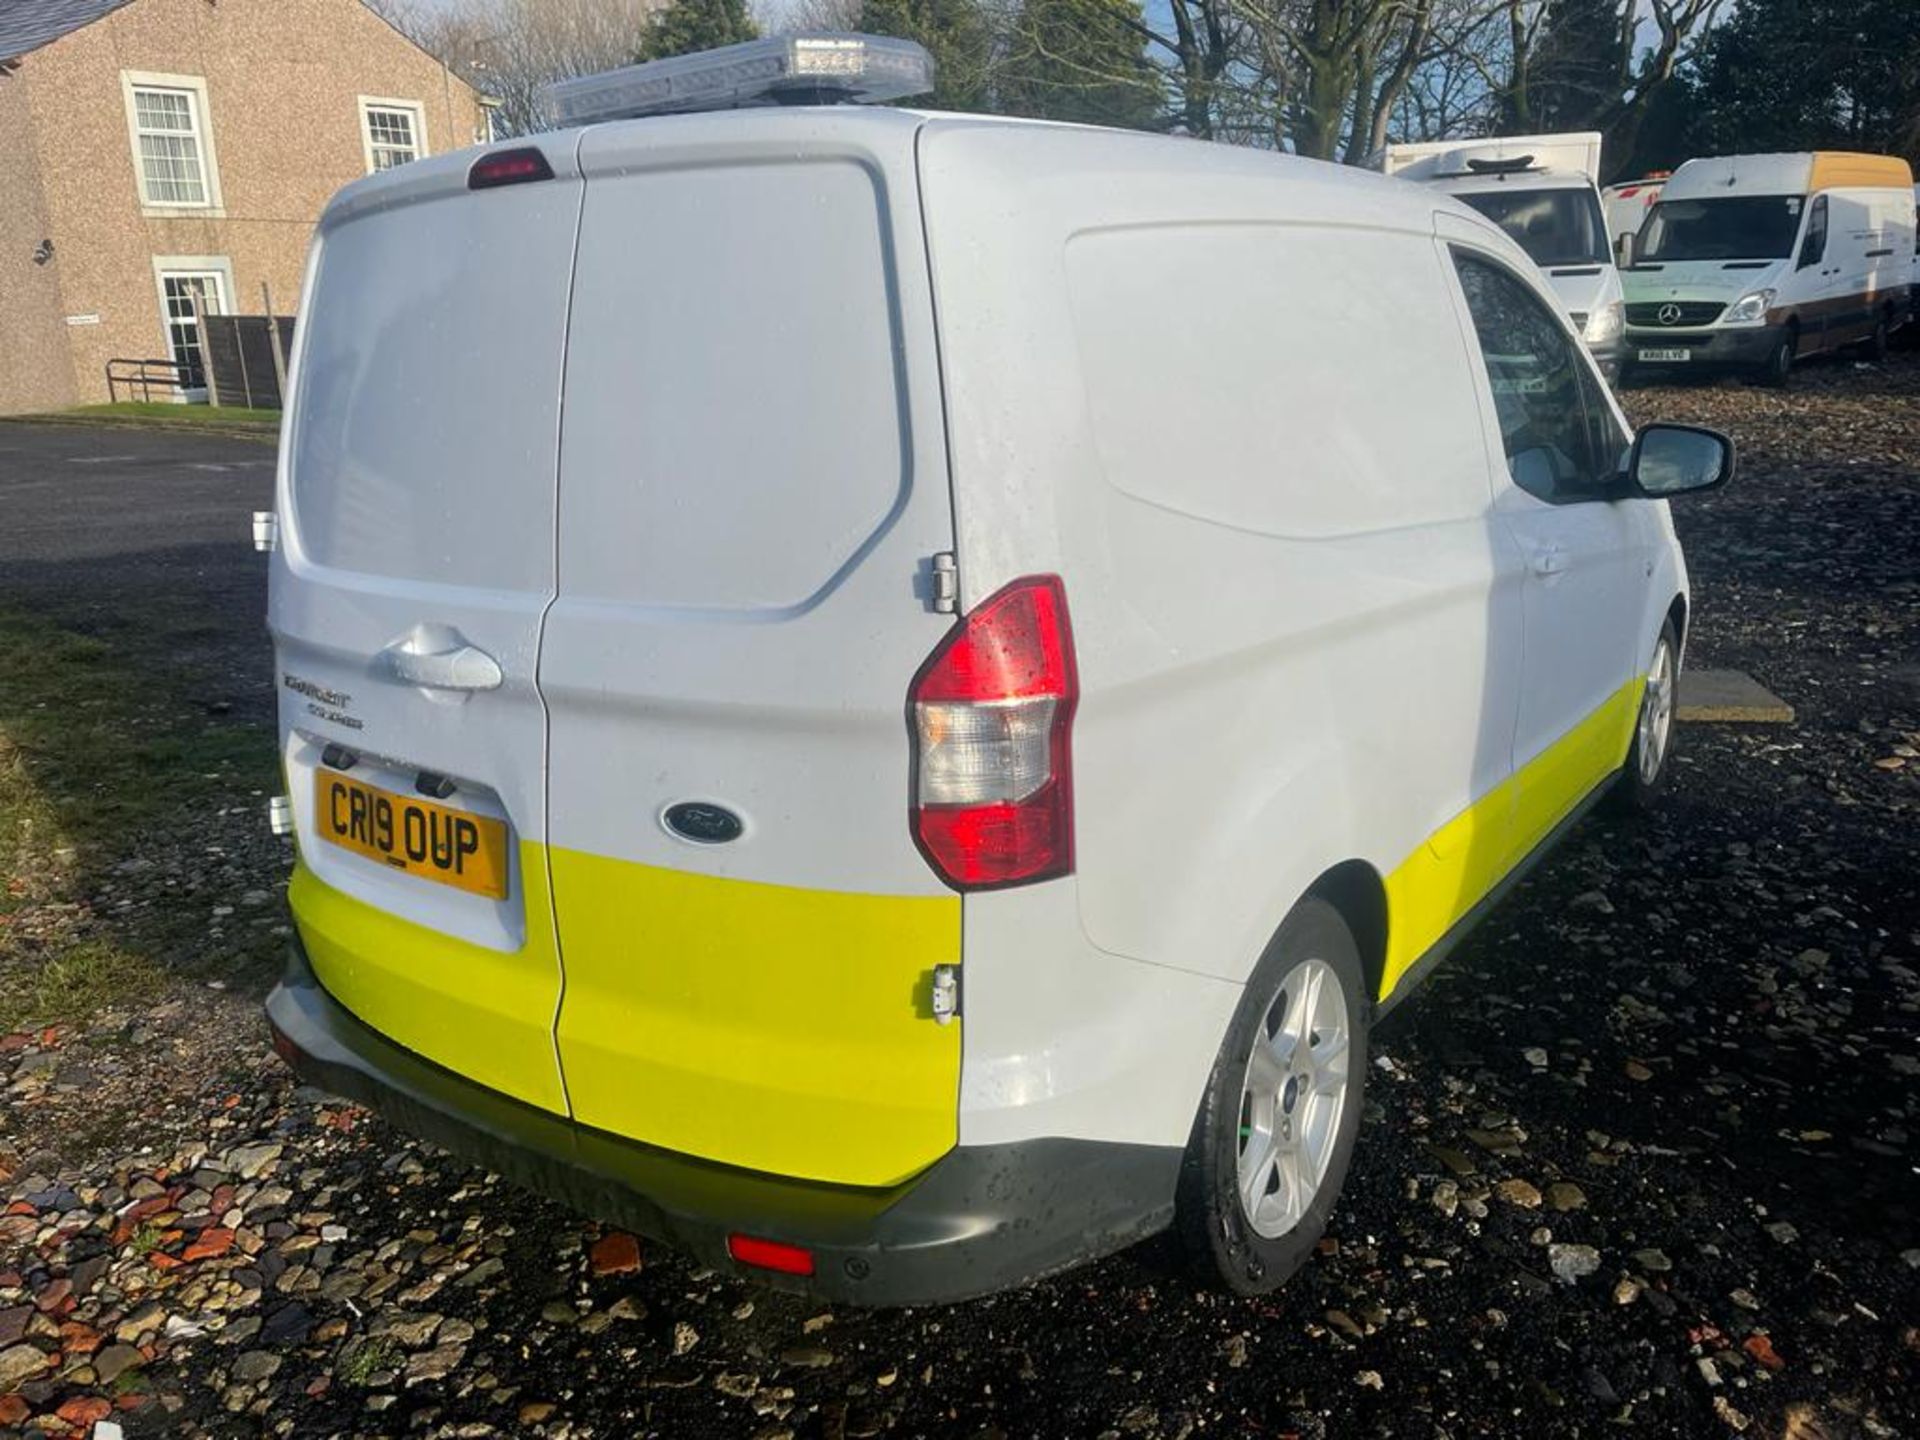 2019 ford transit courier limted van - Image 6 of 15